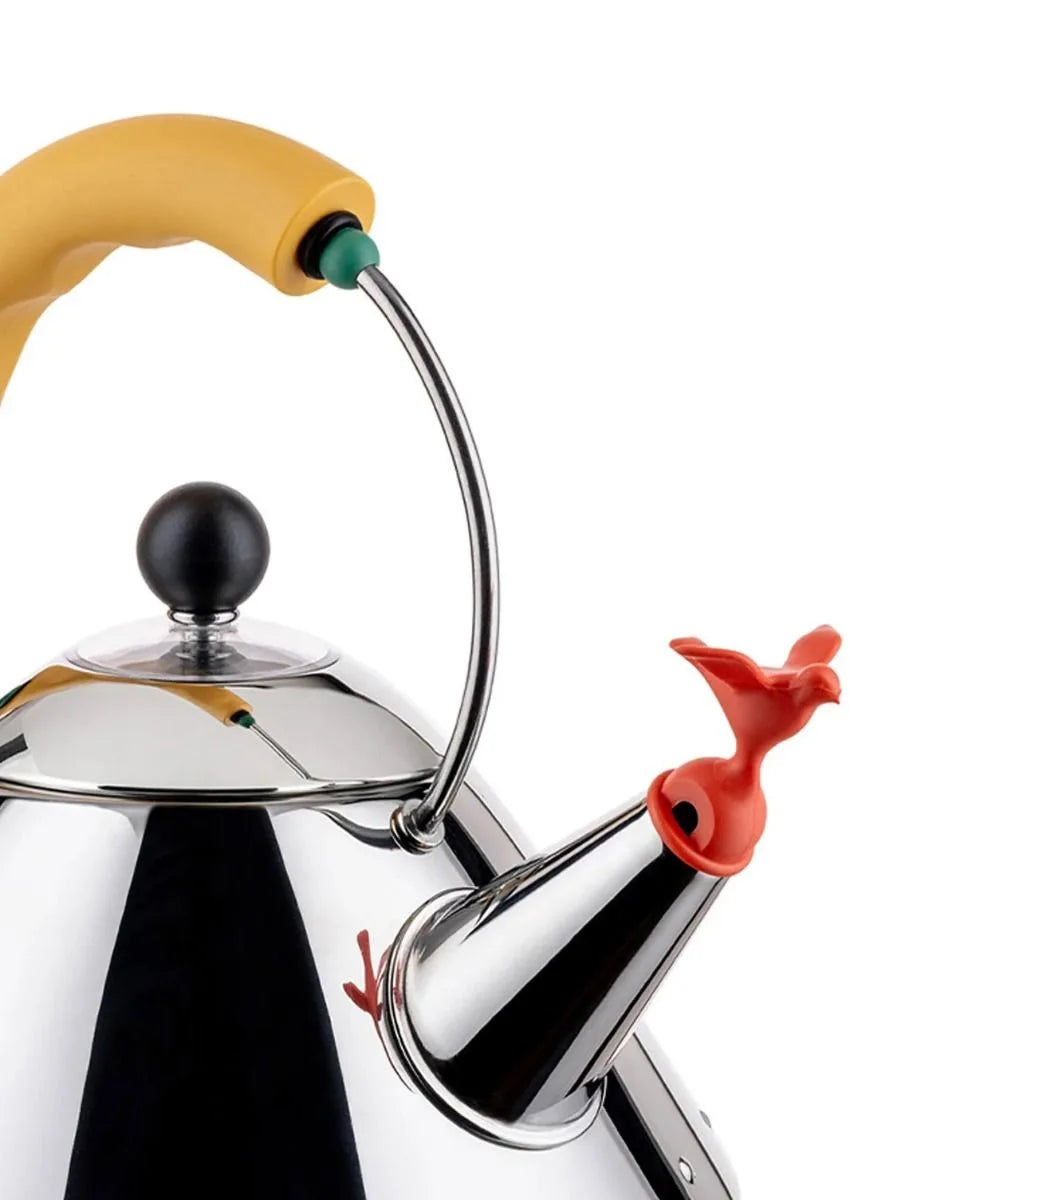 Replacement Alessi bird whistle for 9093 Michael Graves Kettle Coral